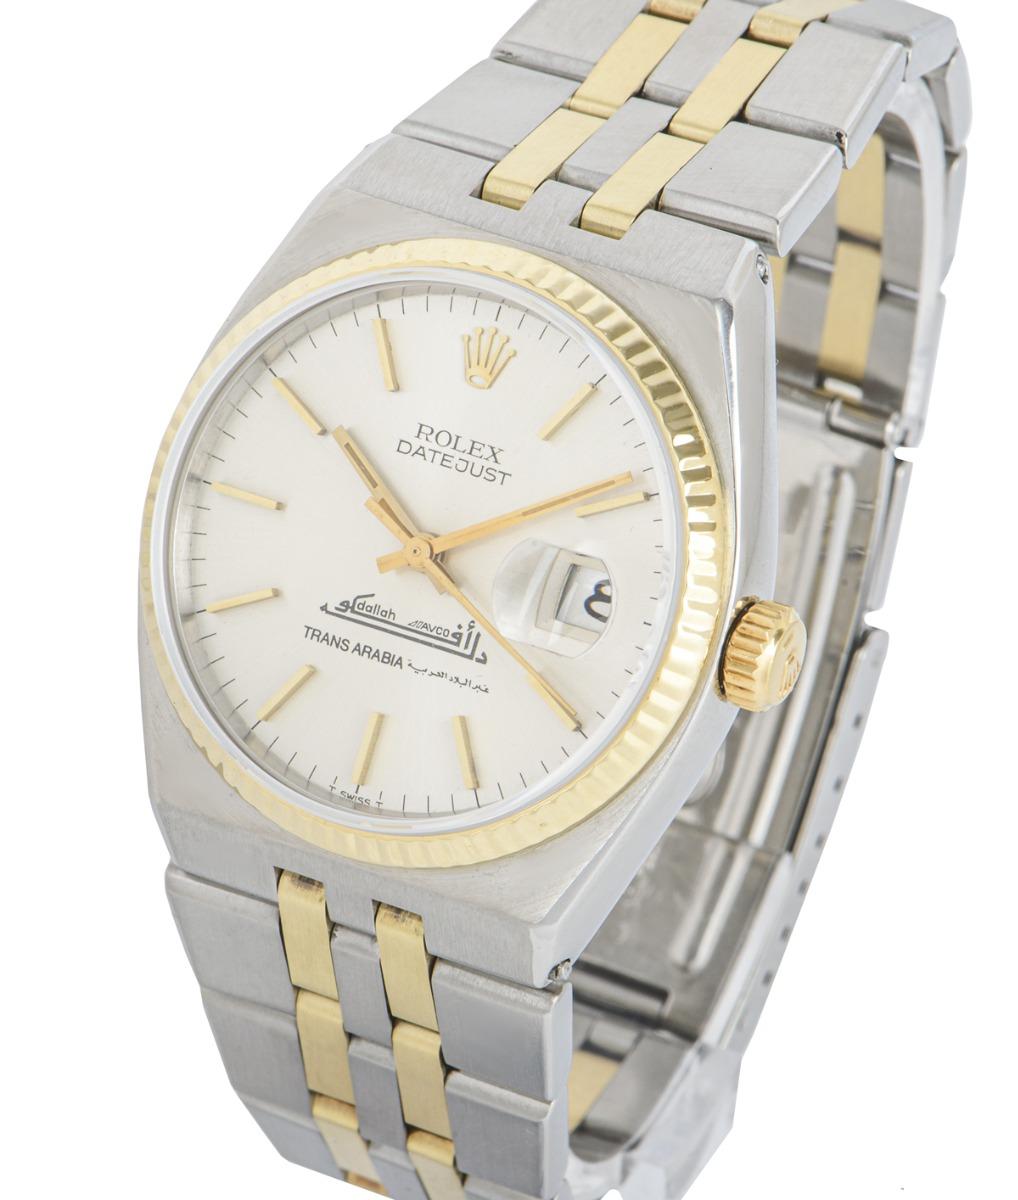 Rolex Oysterquartz Datejust Trans Arabia Dial 17013 In Excellent Condition In London, GB